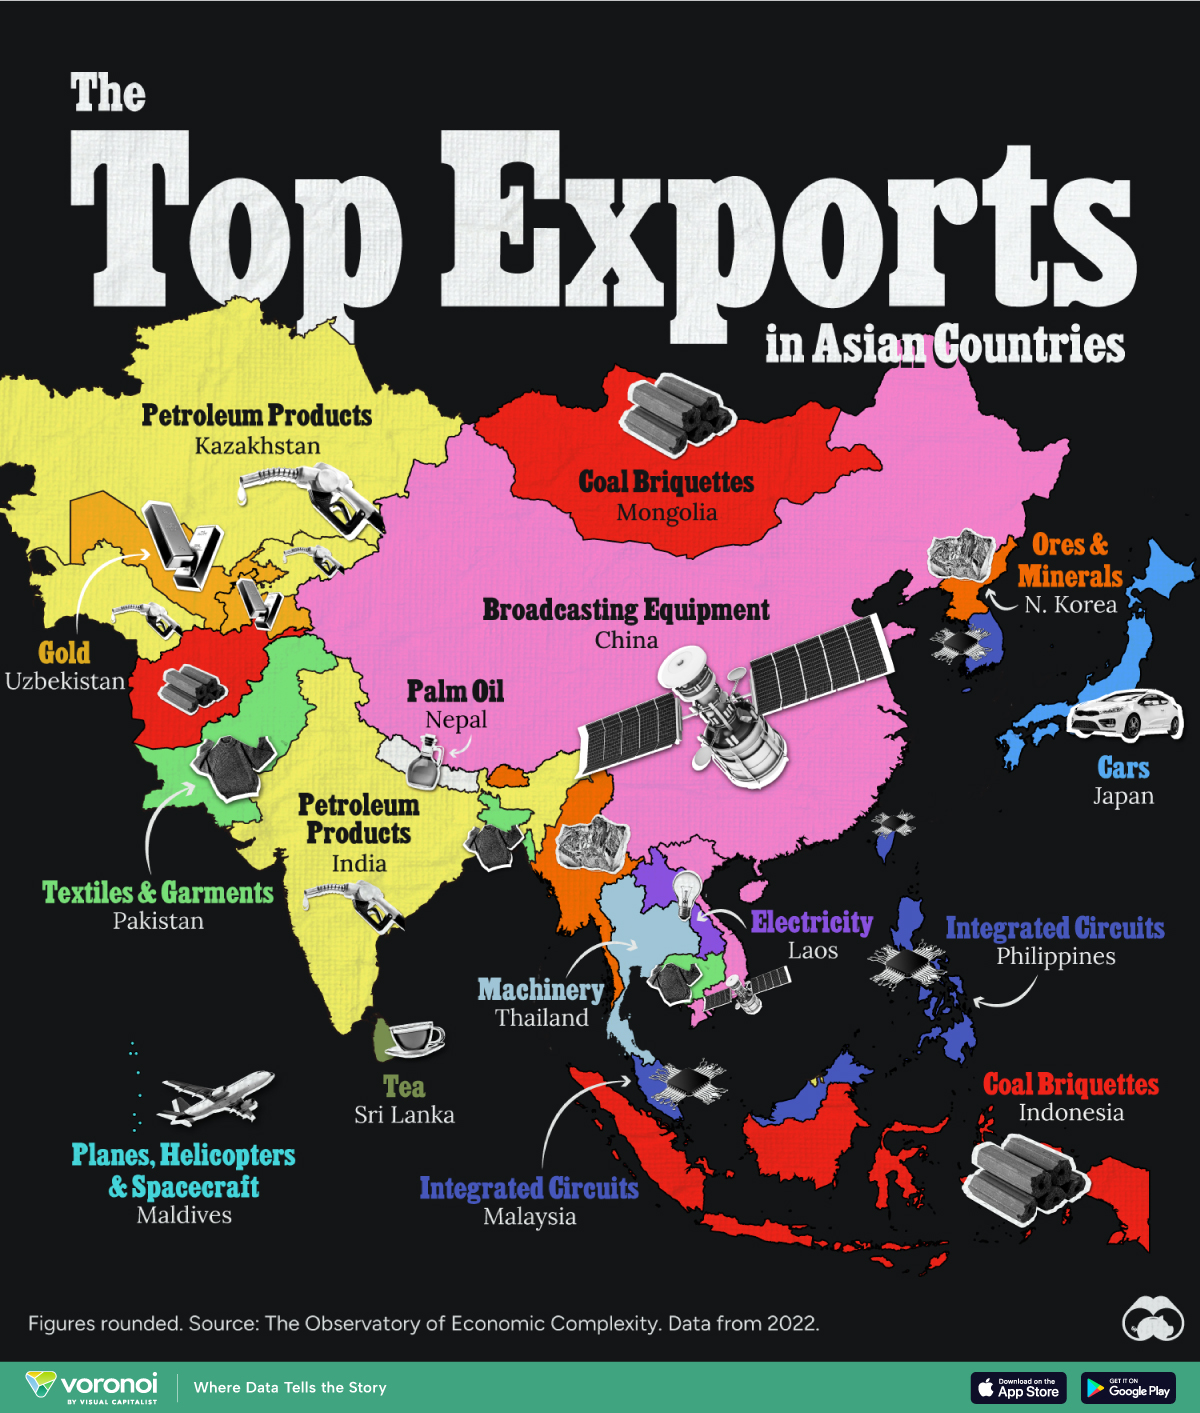 Map displaying the top exports (as of 2022) of Asian countries, excluding Middle Eastern nations.